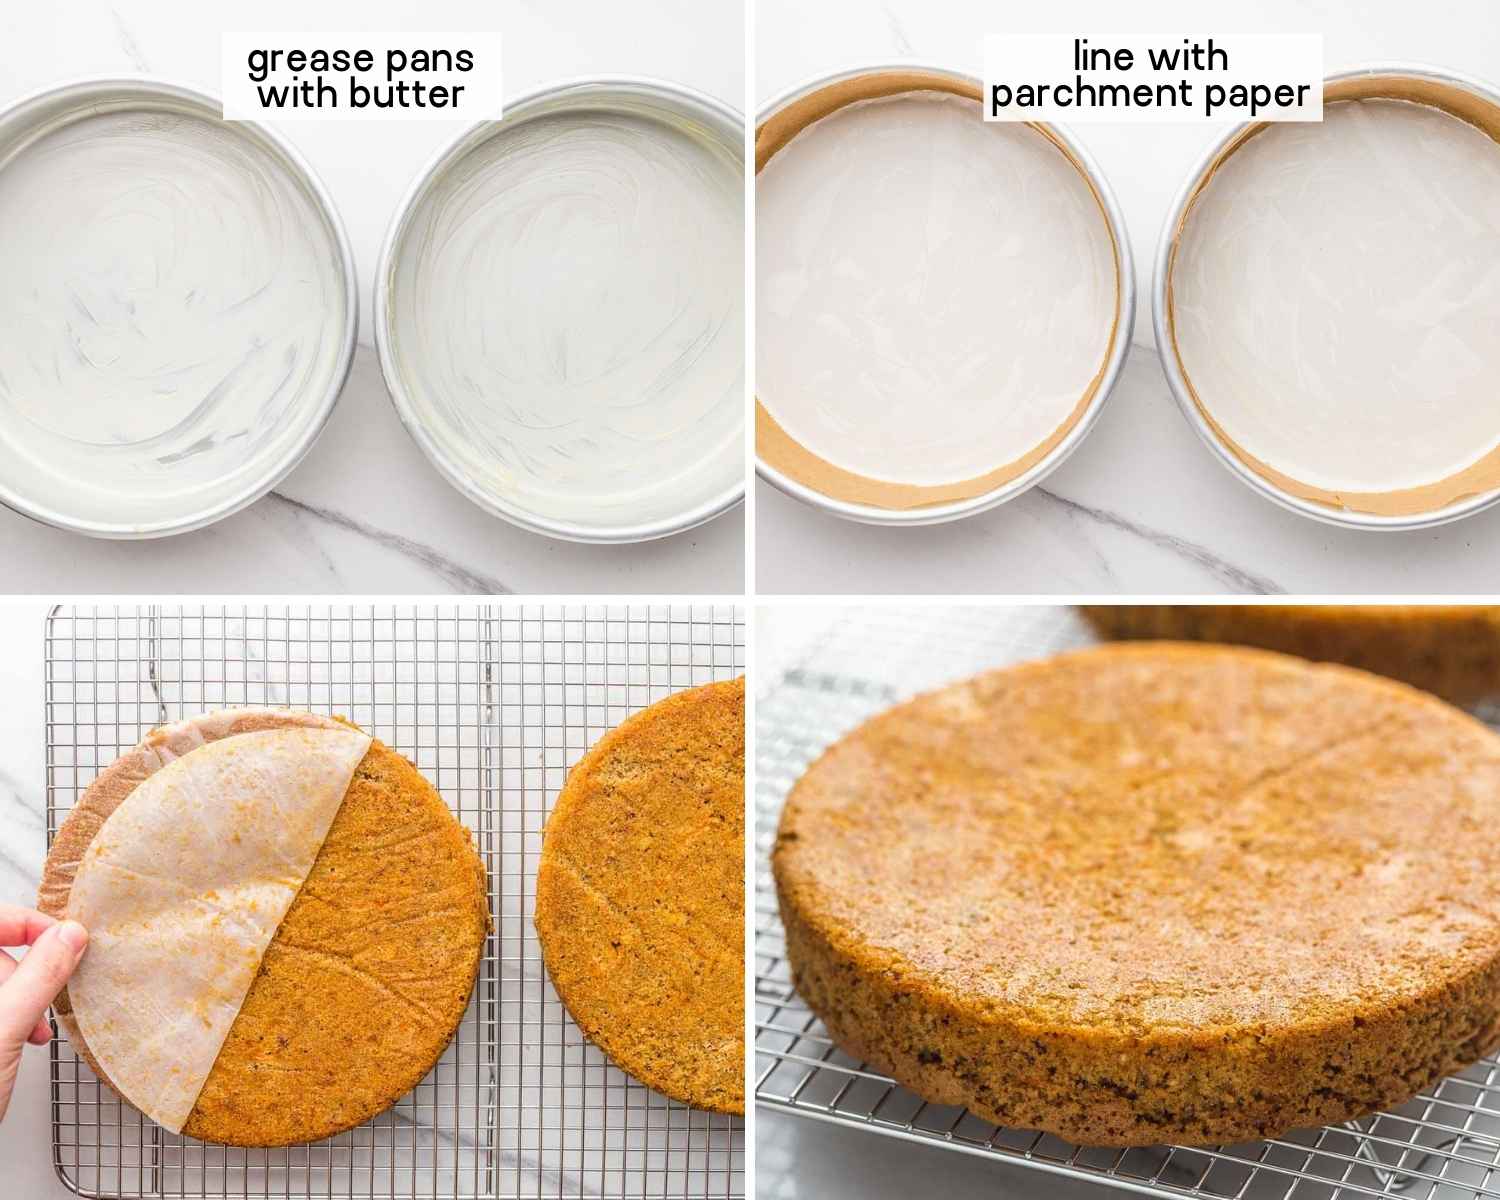 How to Grease Cake Pans The Right Way